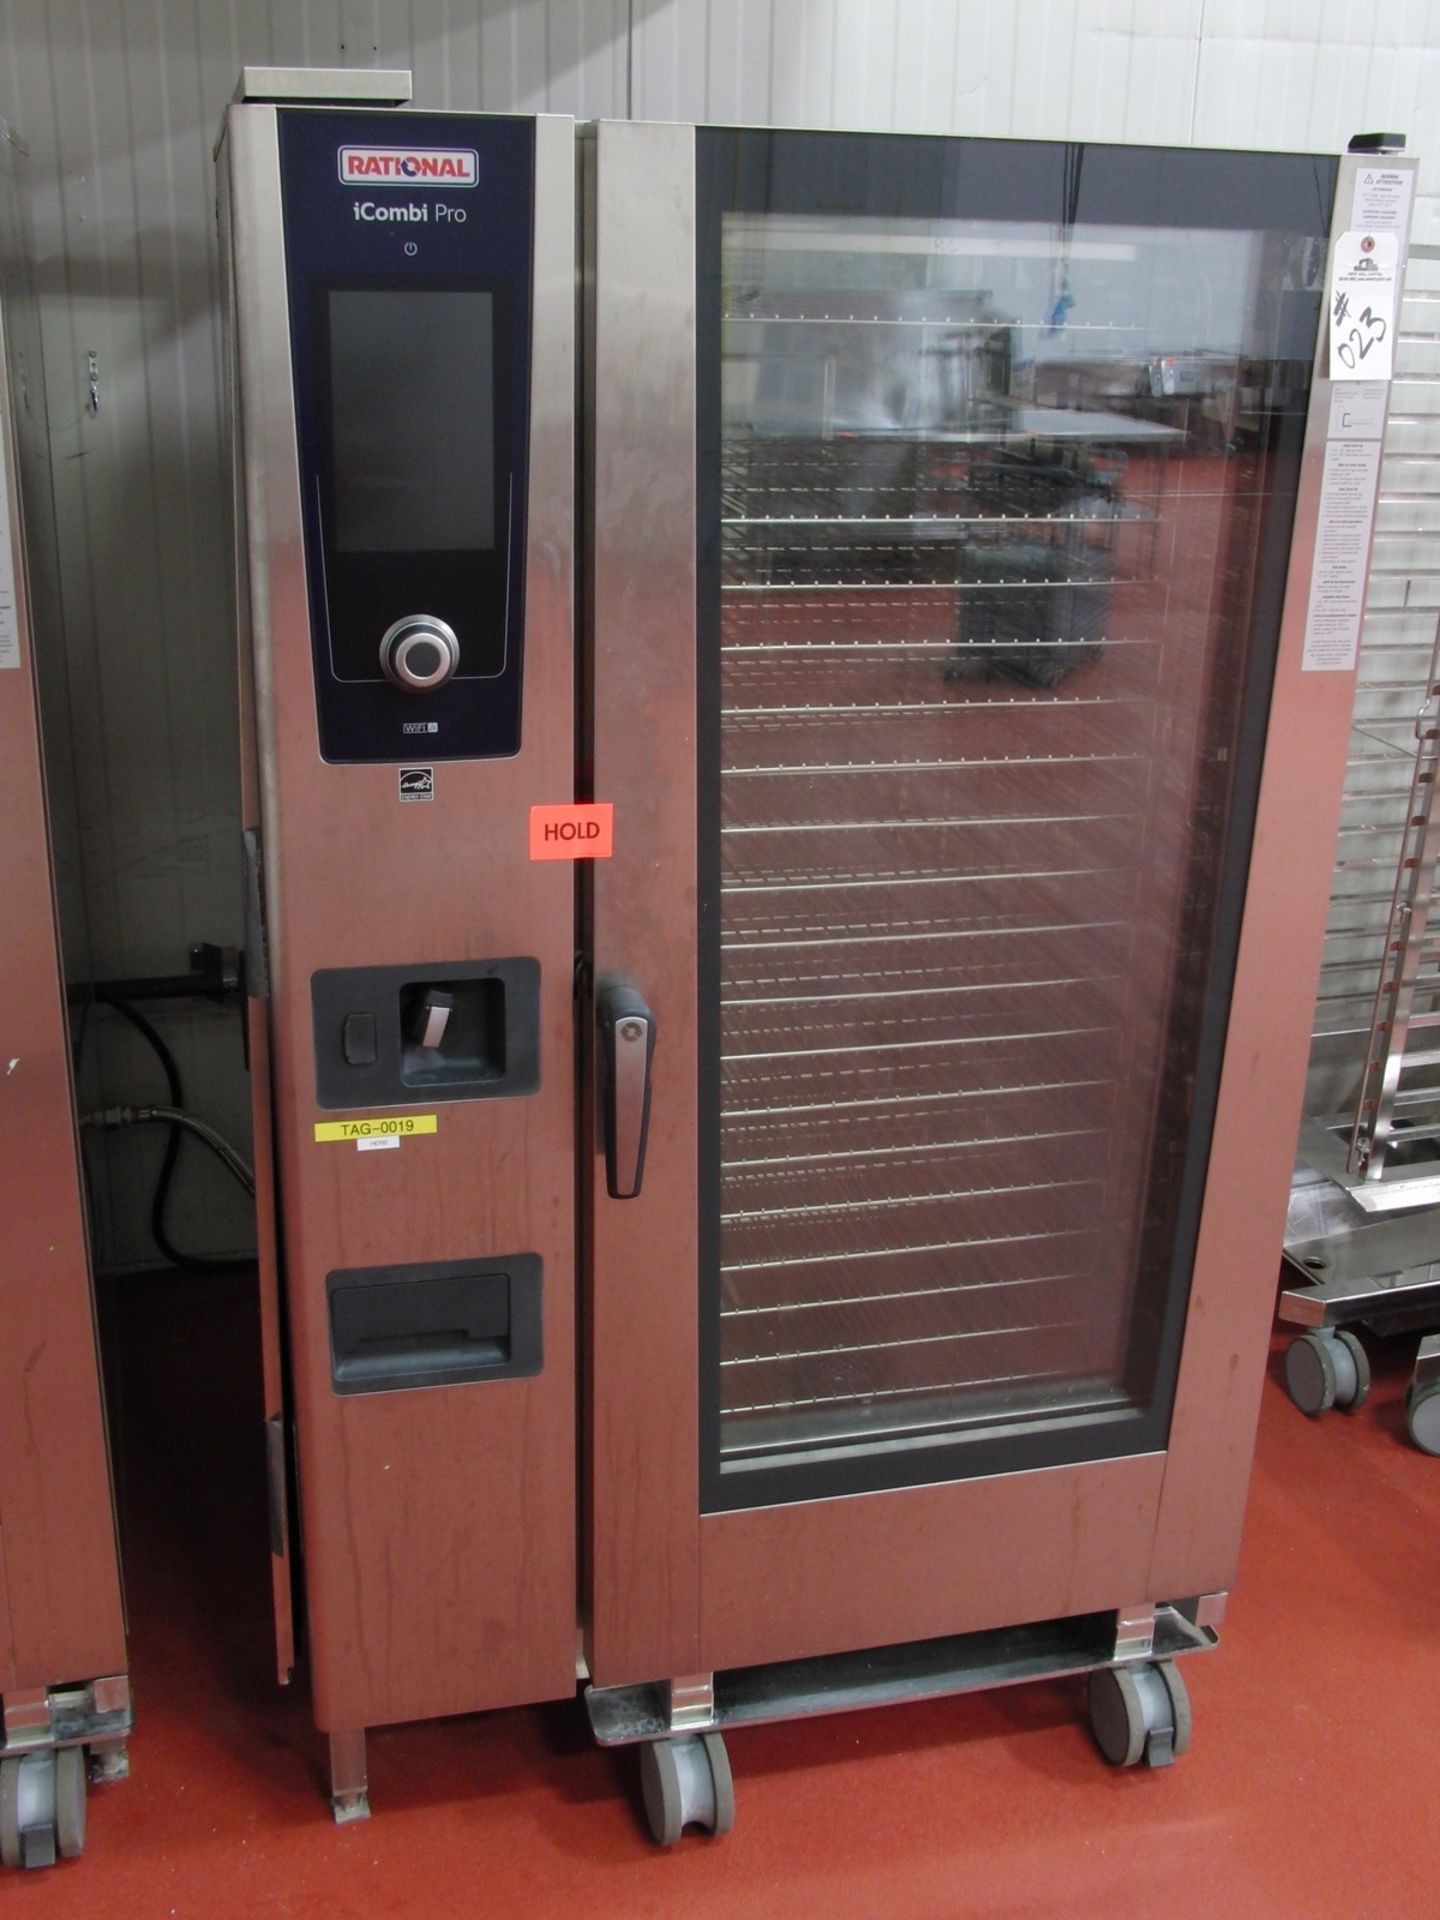 2021 Rational iCombi Pro Model LM100GG Steam Oven 240 v, 15 AMPS, 60 Hz, S/N: G22S | Rig Fee $500 - Image 2 of 4